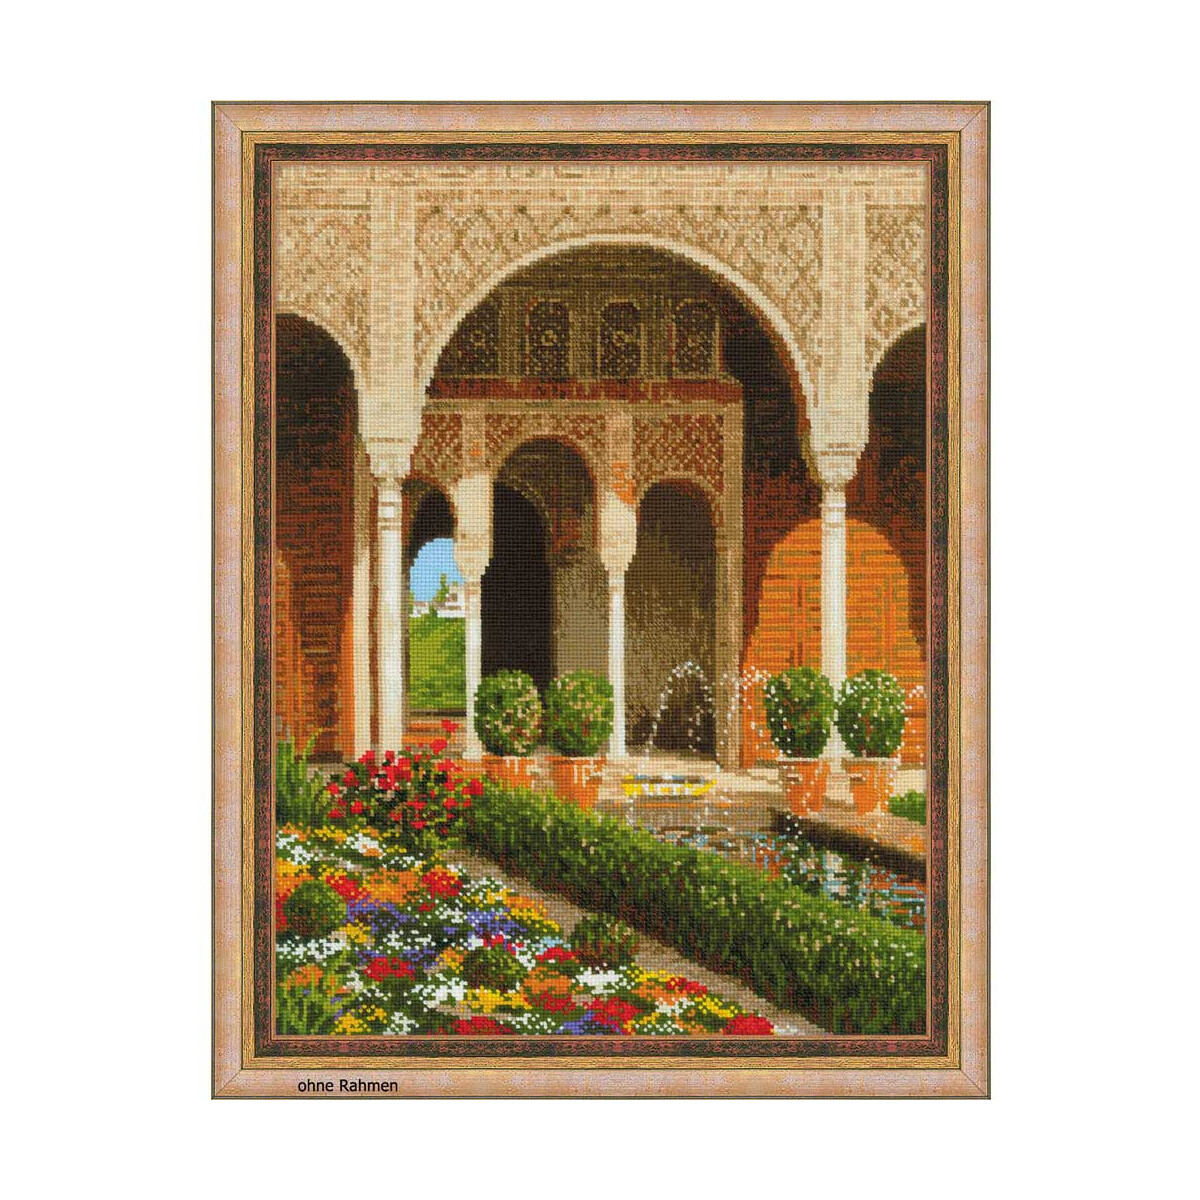 Riolis counted cross stitch Kit The Palace Garden, DIY